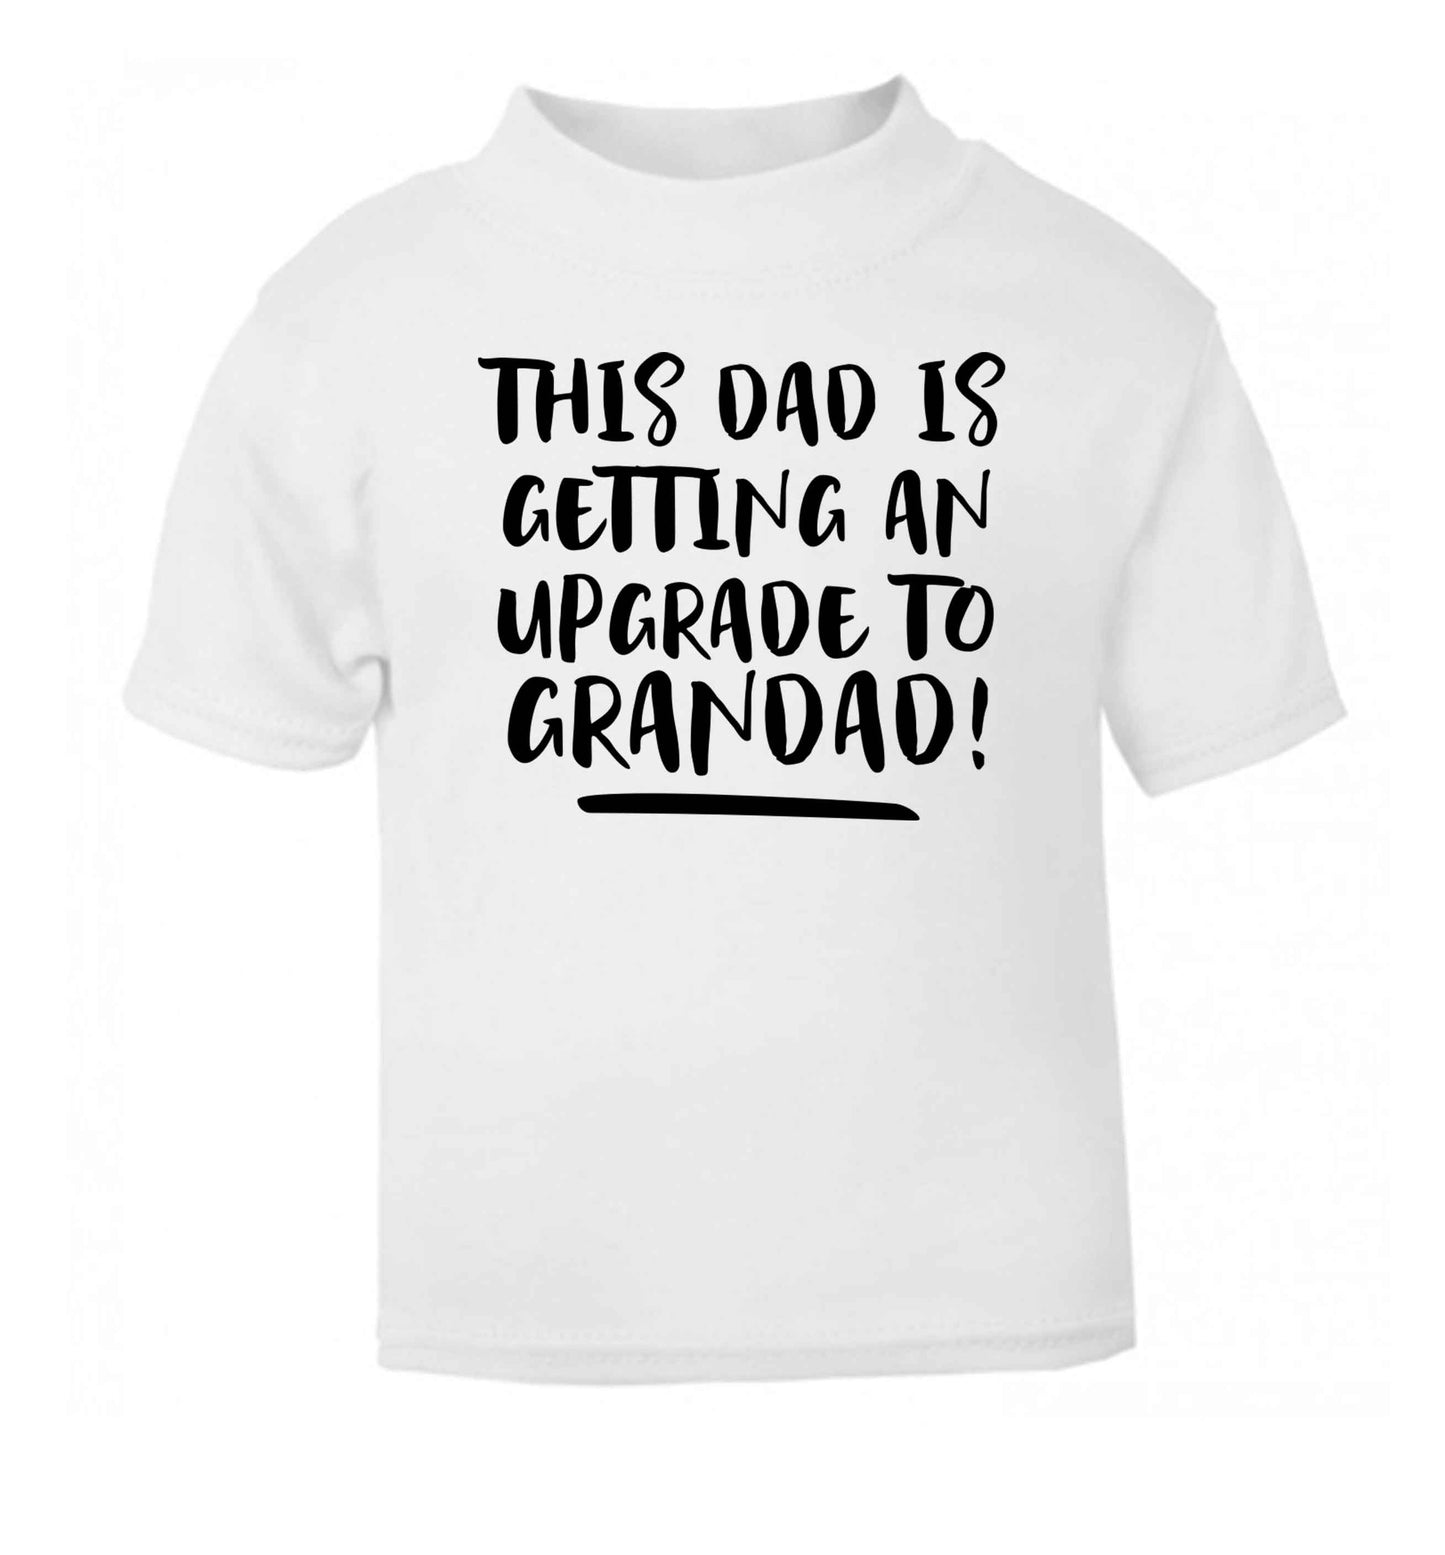 This dad is getting an upgrade to grandad! white Baby Toddler Tshirt 2 Years